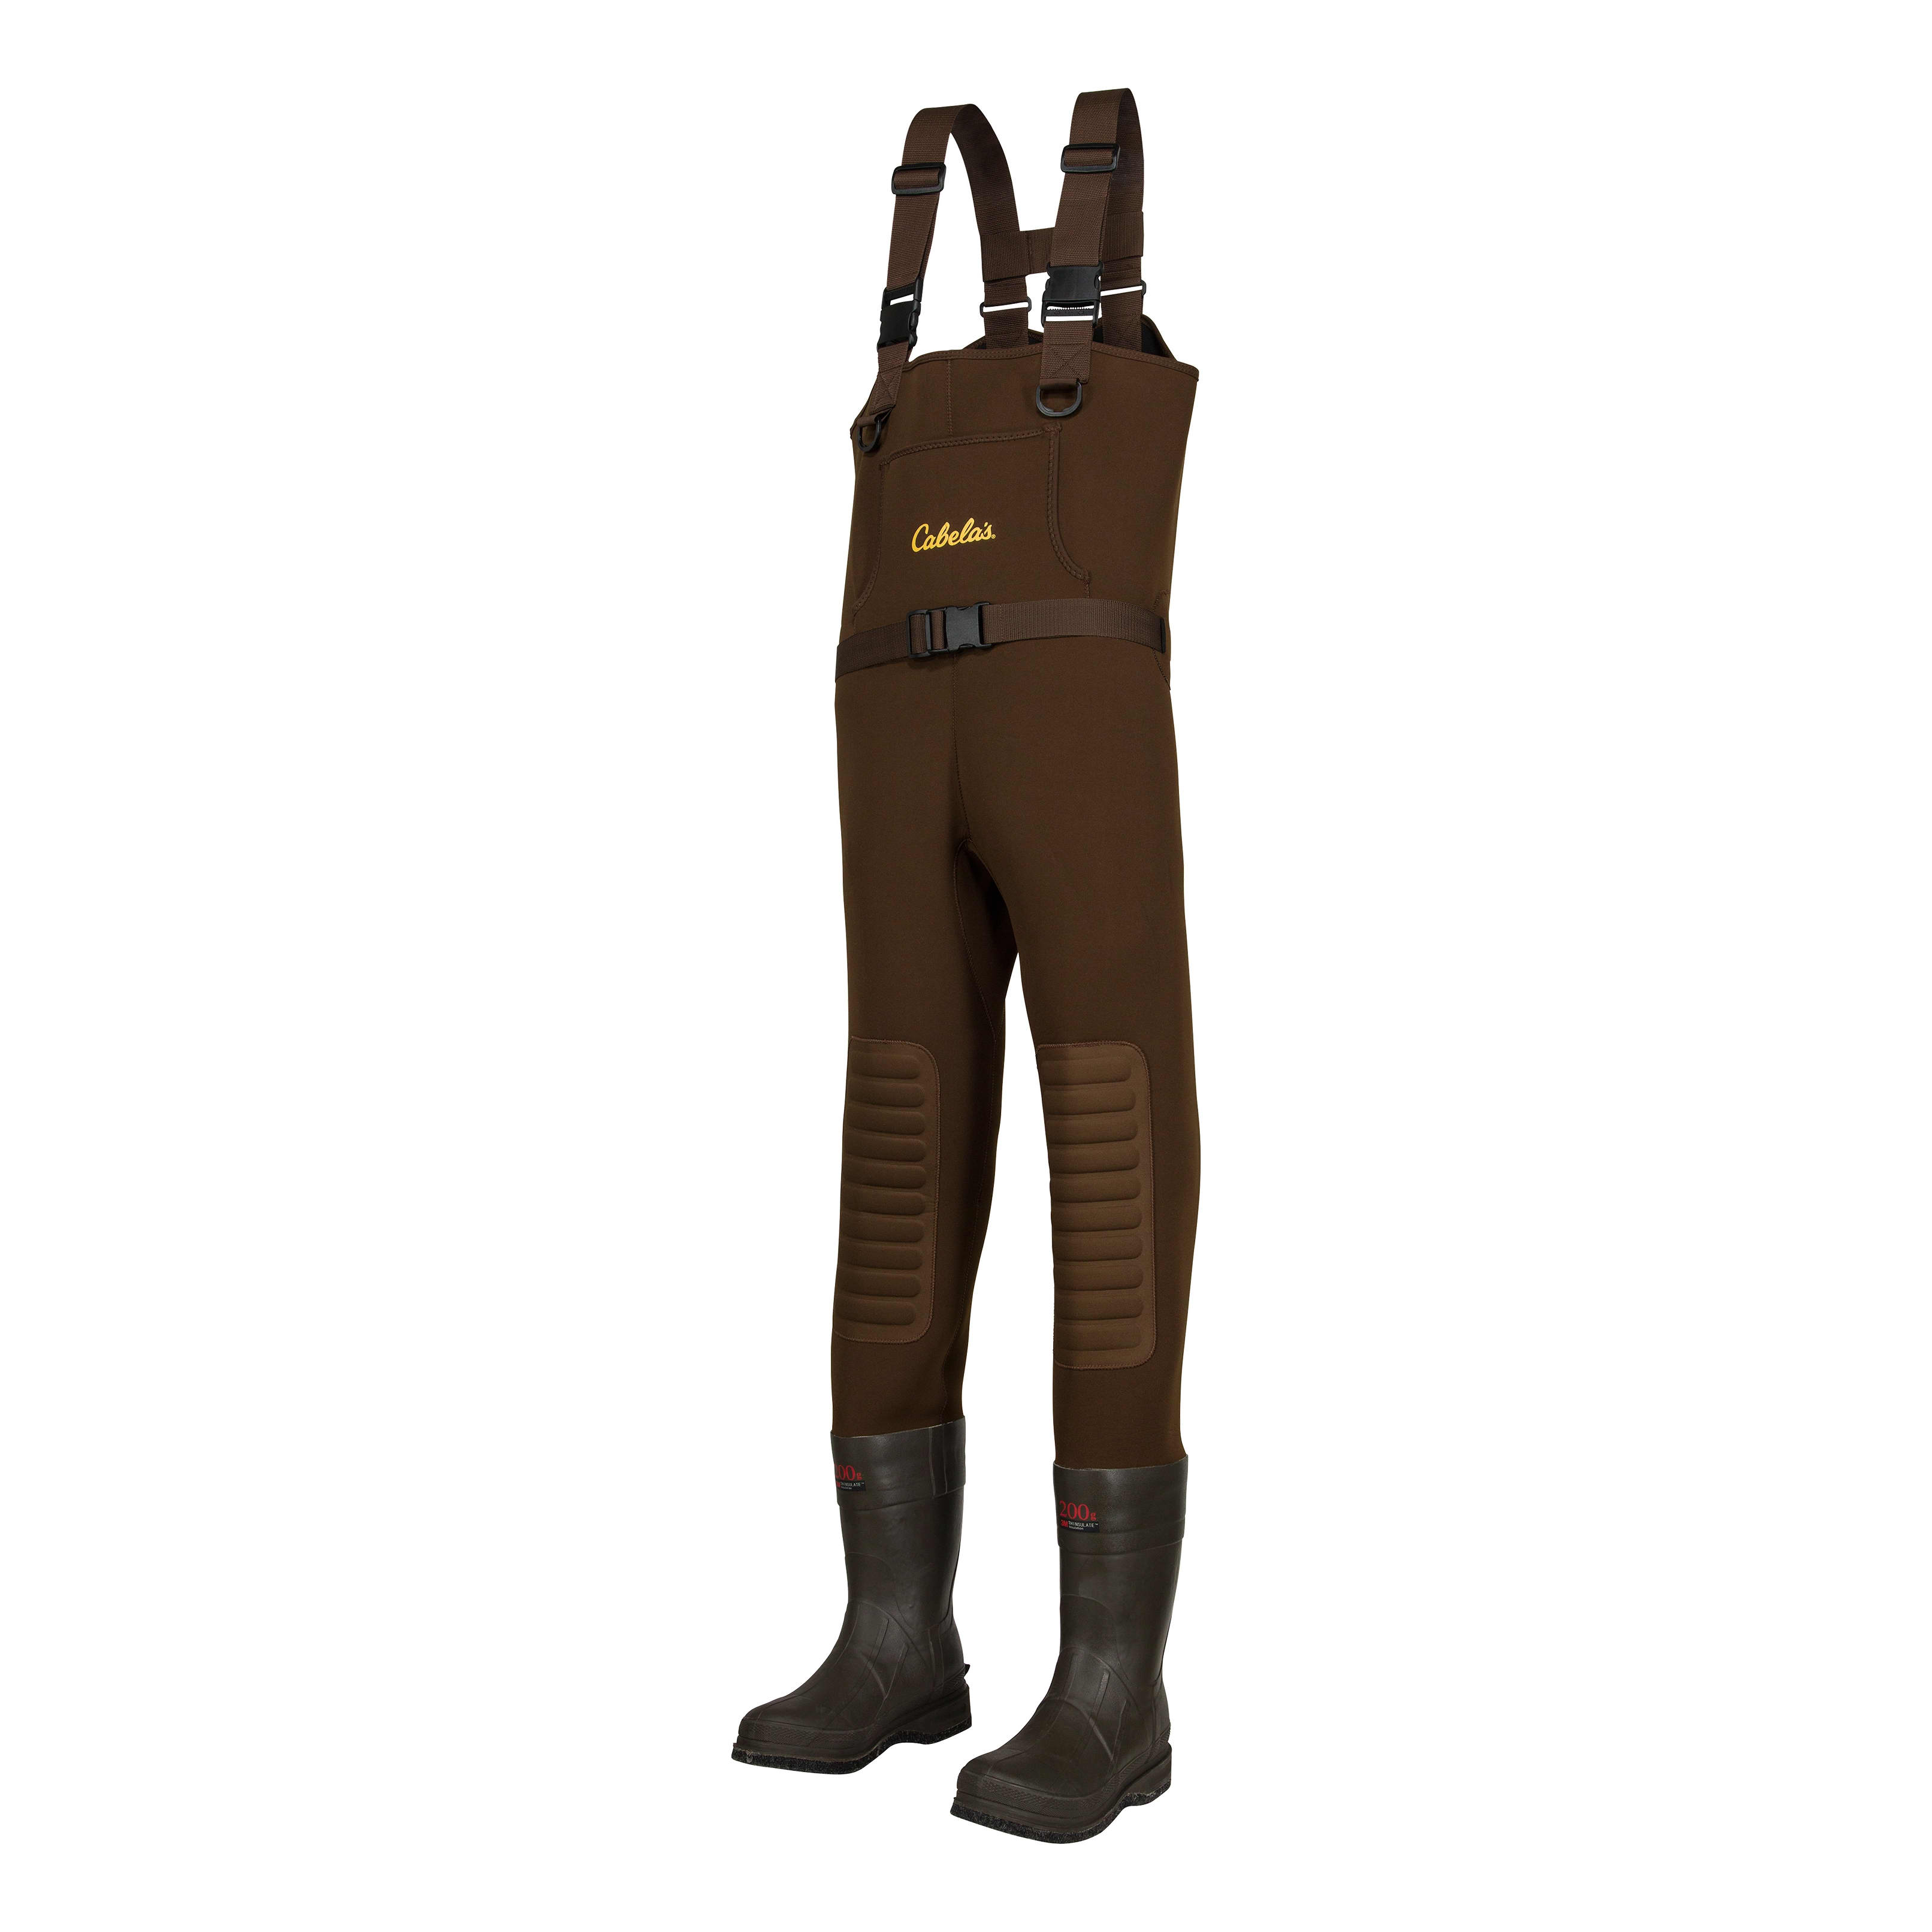 The Difference Between Bootfoot & Stockingfoot Waders